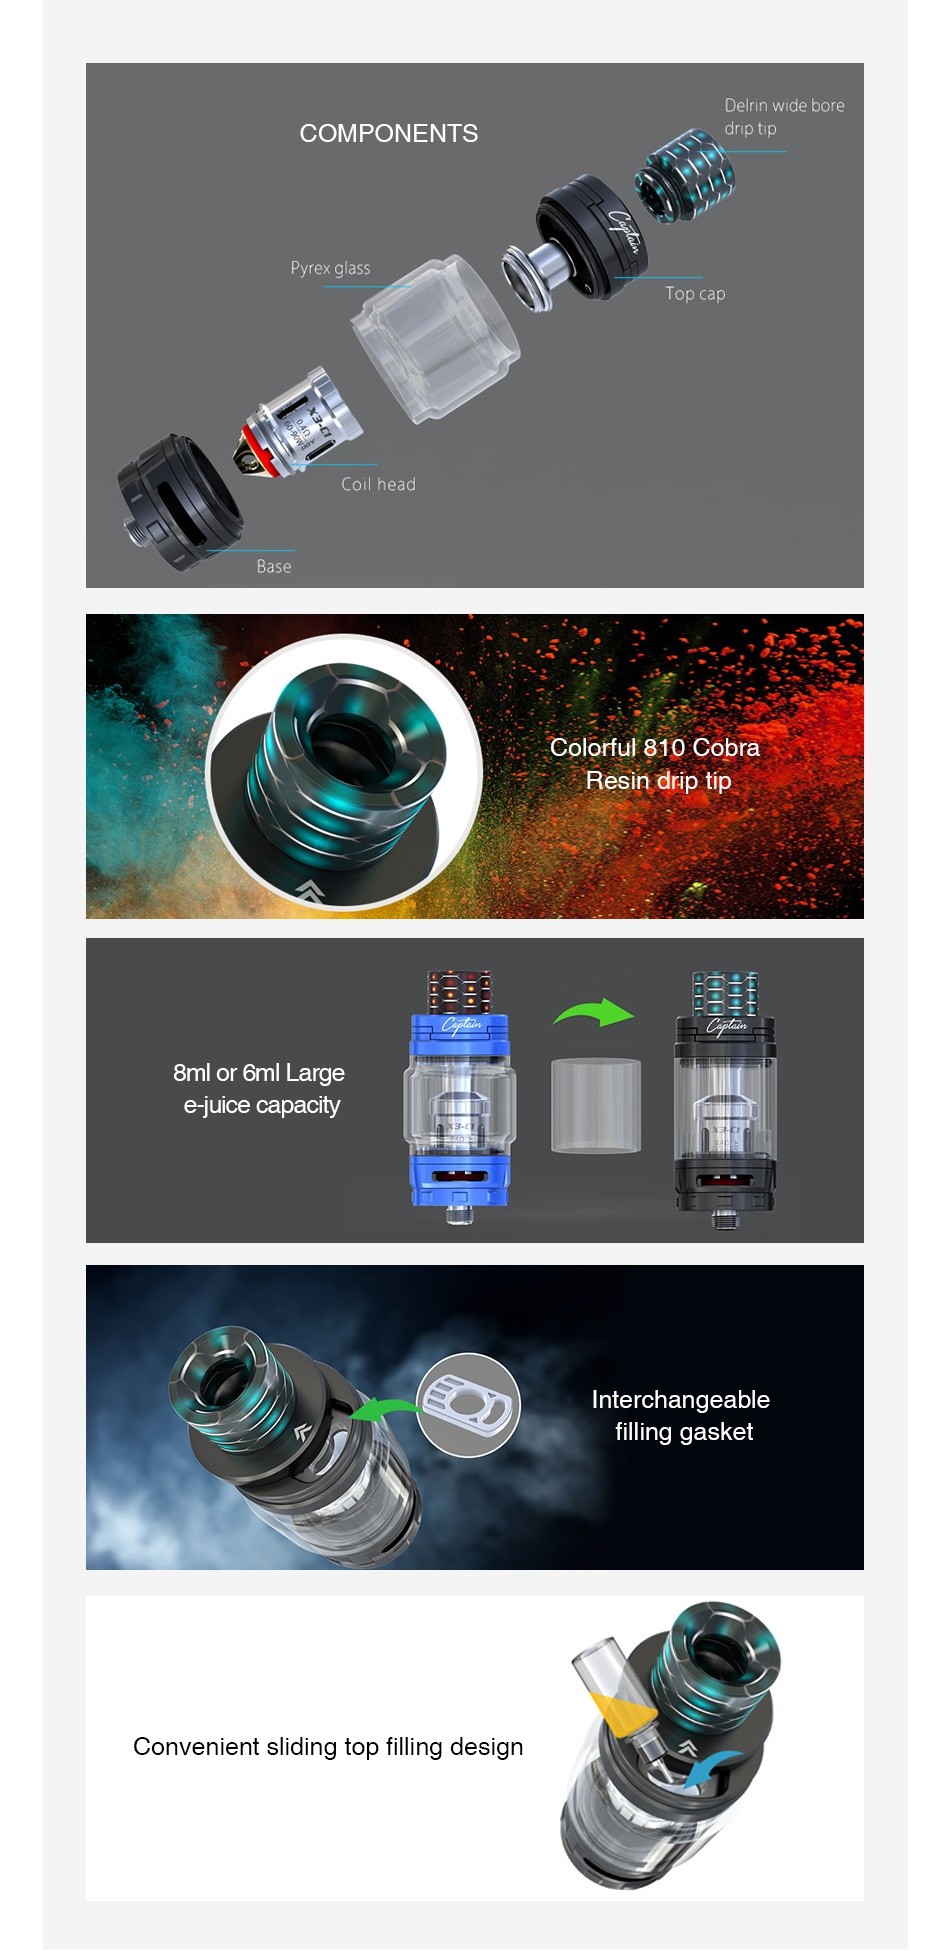 IJOY Captain X3 Subohm Tank 8ml Delrin wide bore COMPONENTS drip ti Pyrex glass Coil head Ba Colorful 810 Cobra Resin drip tip 8ml or 6ml Larg e Juice capacity interchangeable filling gasket Convenient sliding top filling design